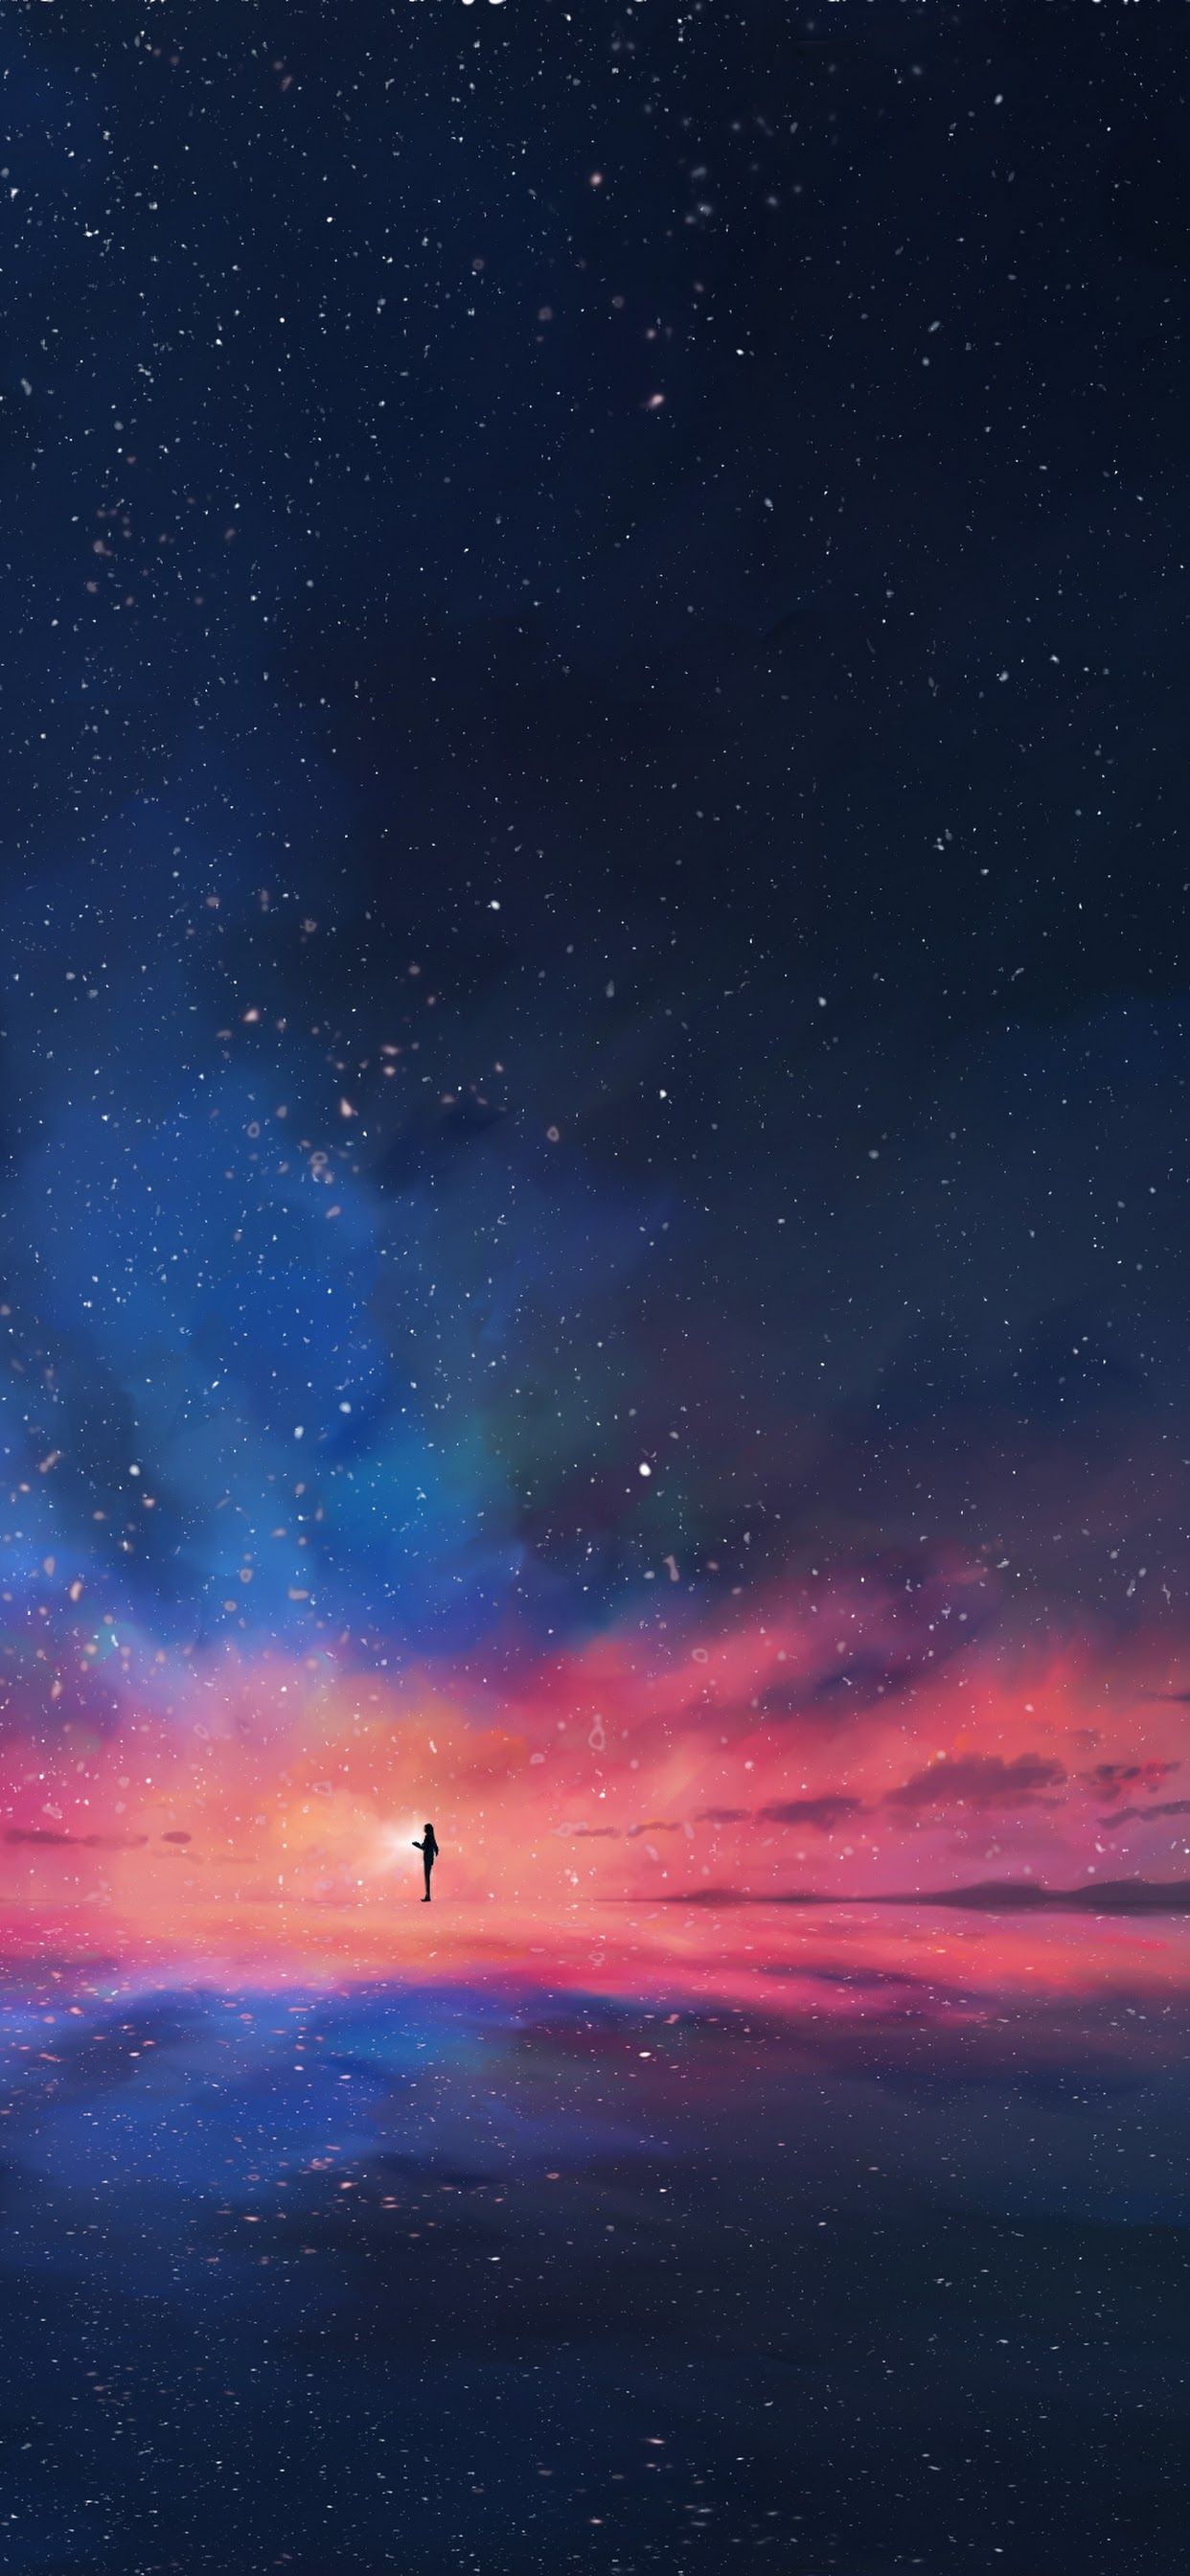 Anime Sky Iphone 11 Pro Max Wallpapers Wallpaper Cave